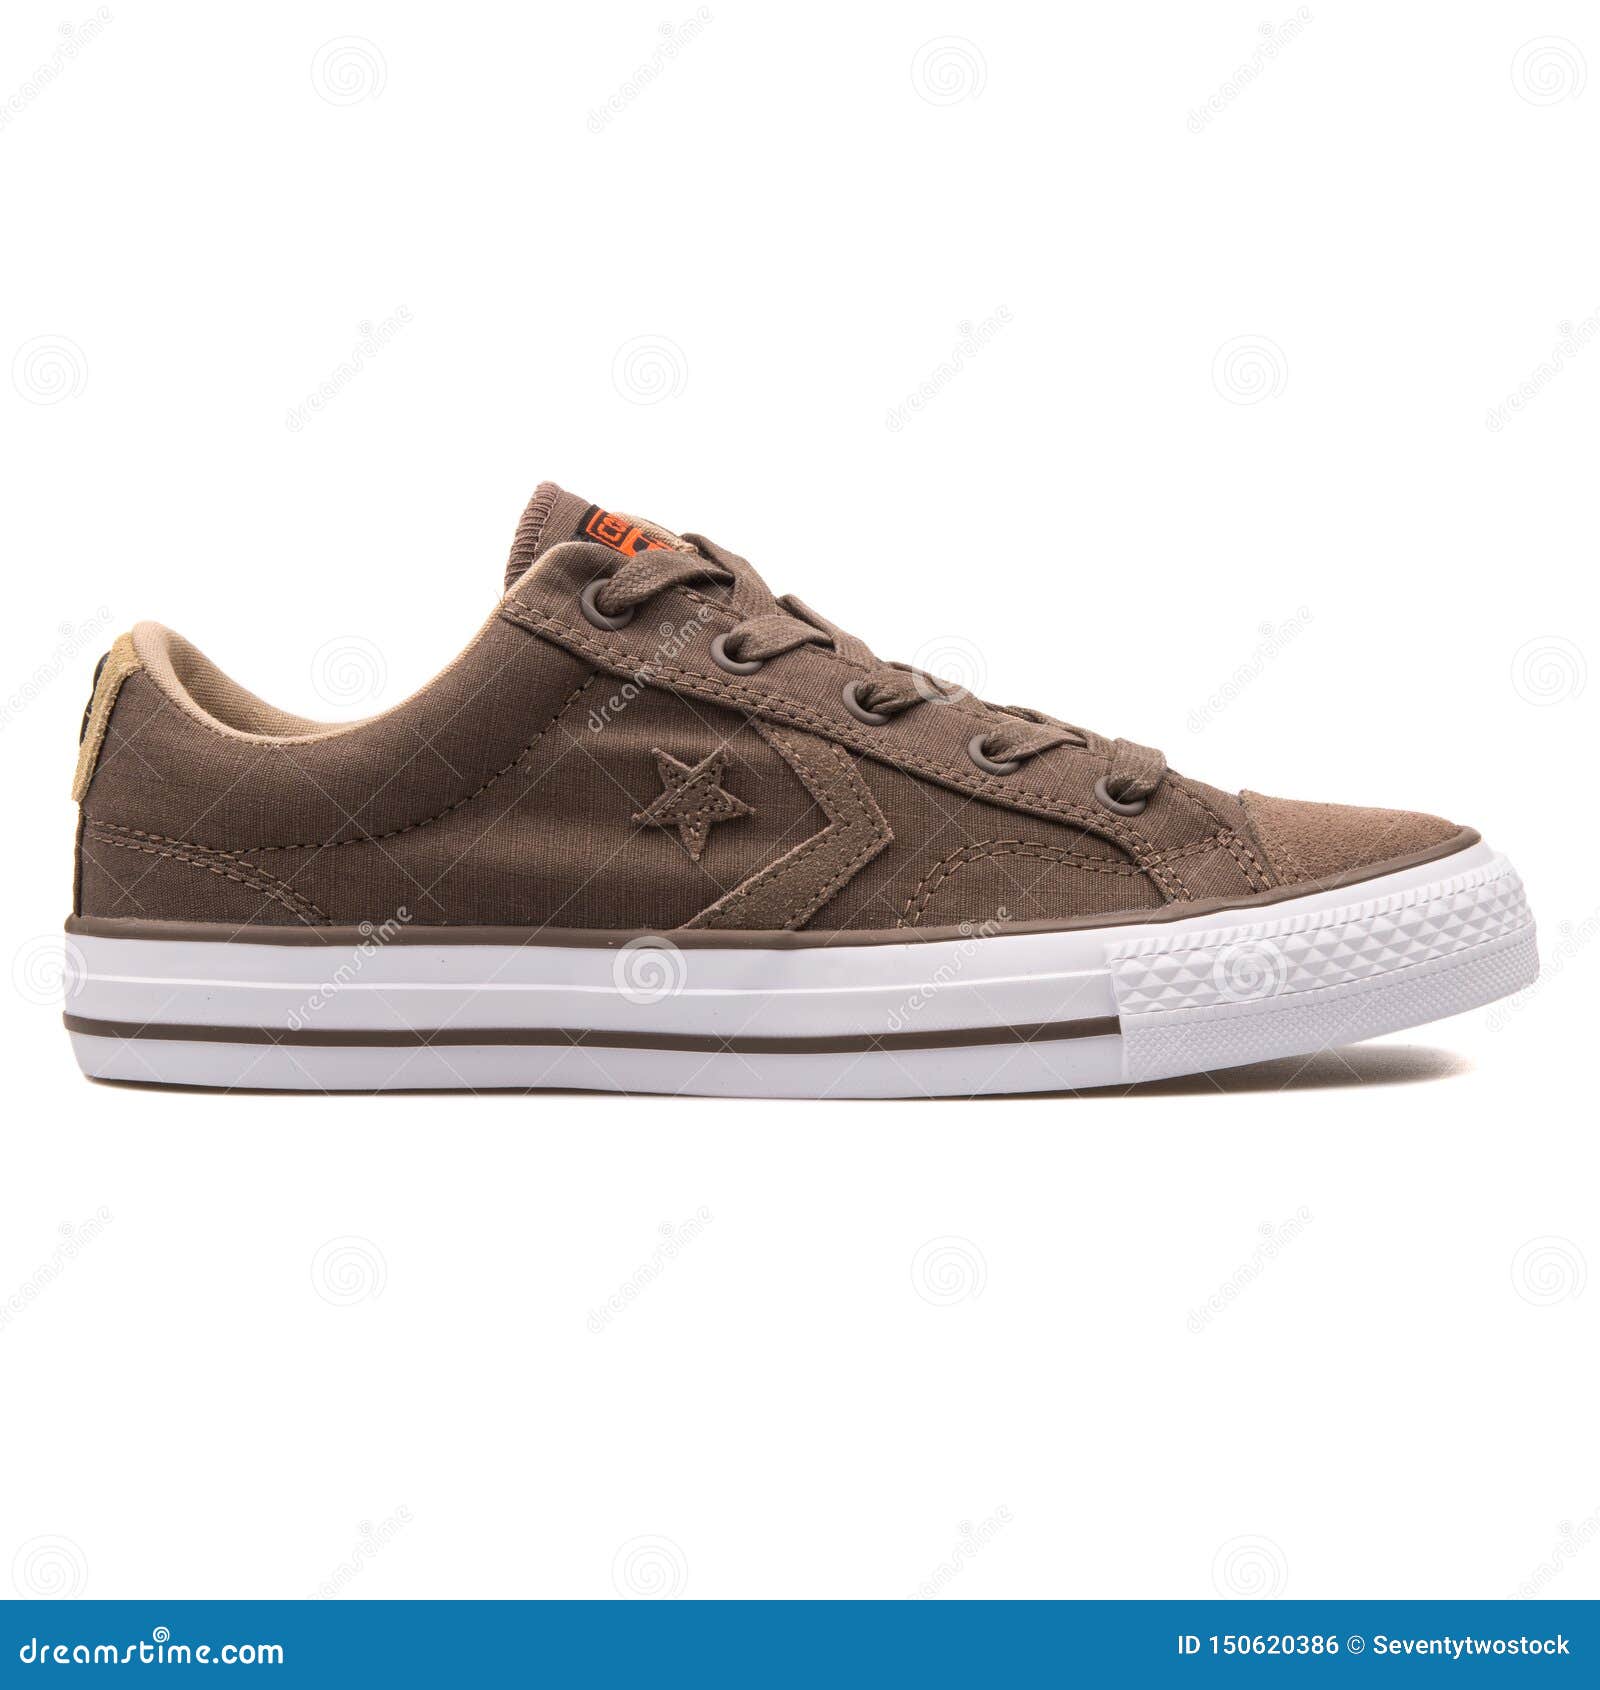 Converse Lifestyle Star Player Ox Hotsell, 60% OFF ... كريم حفاظ